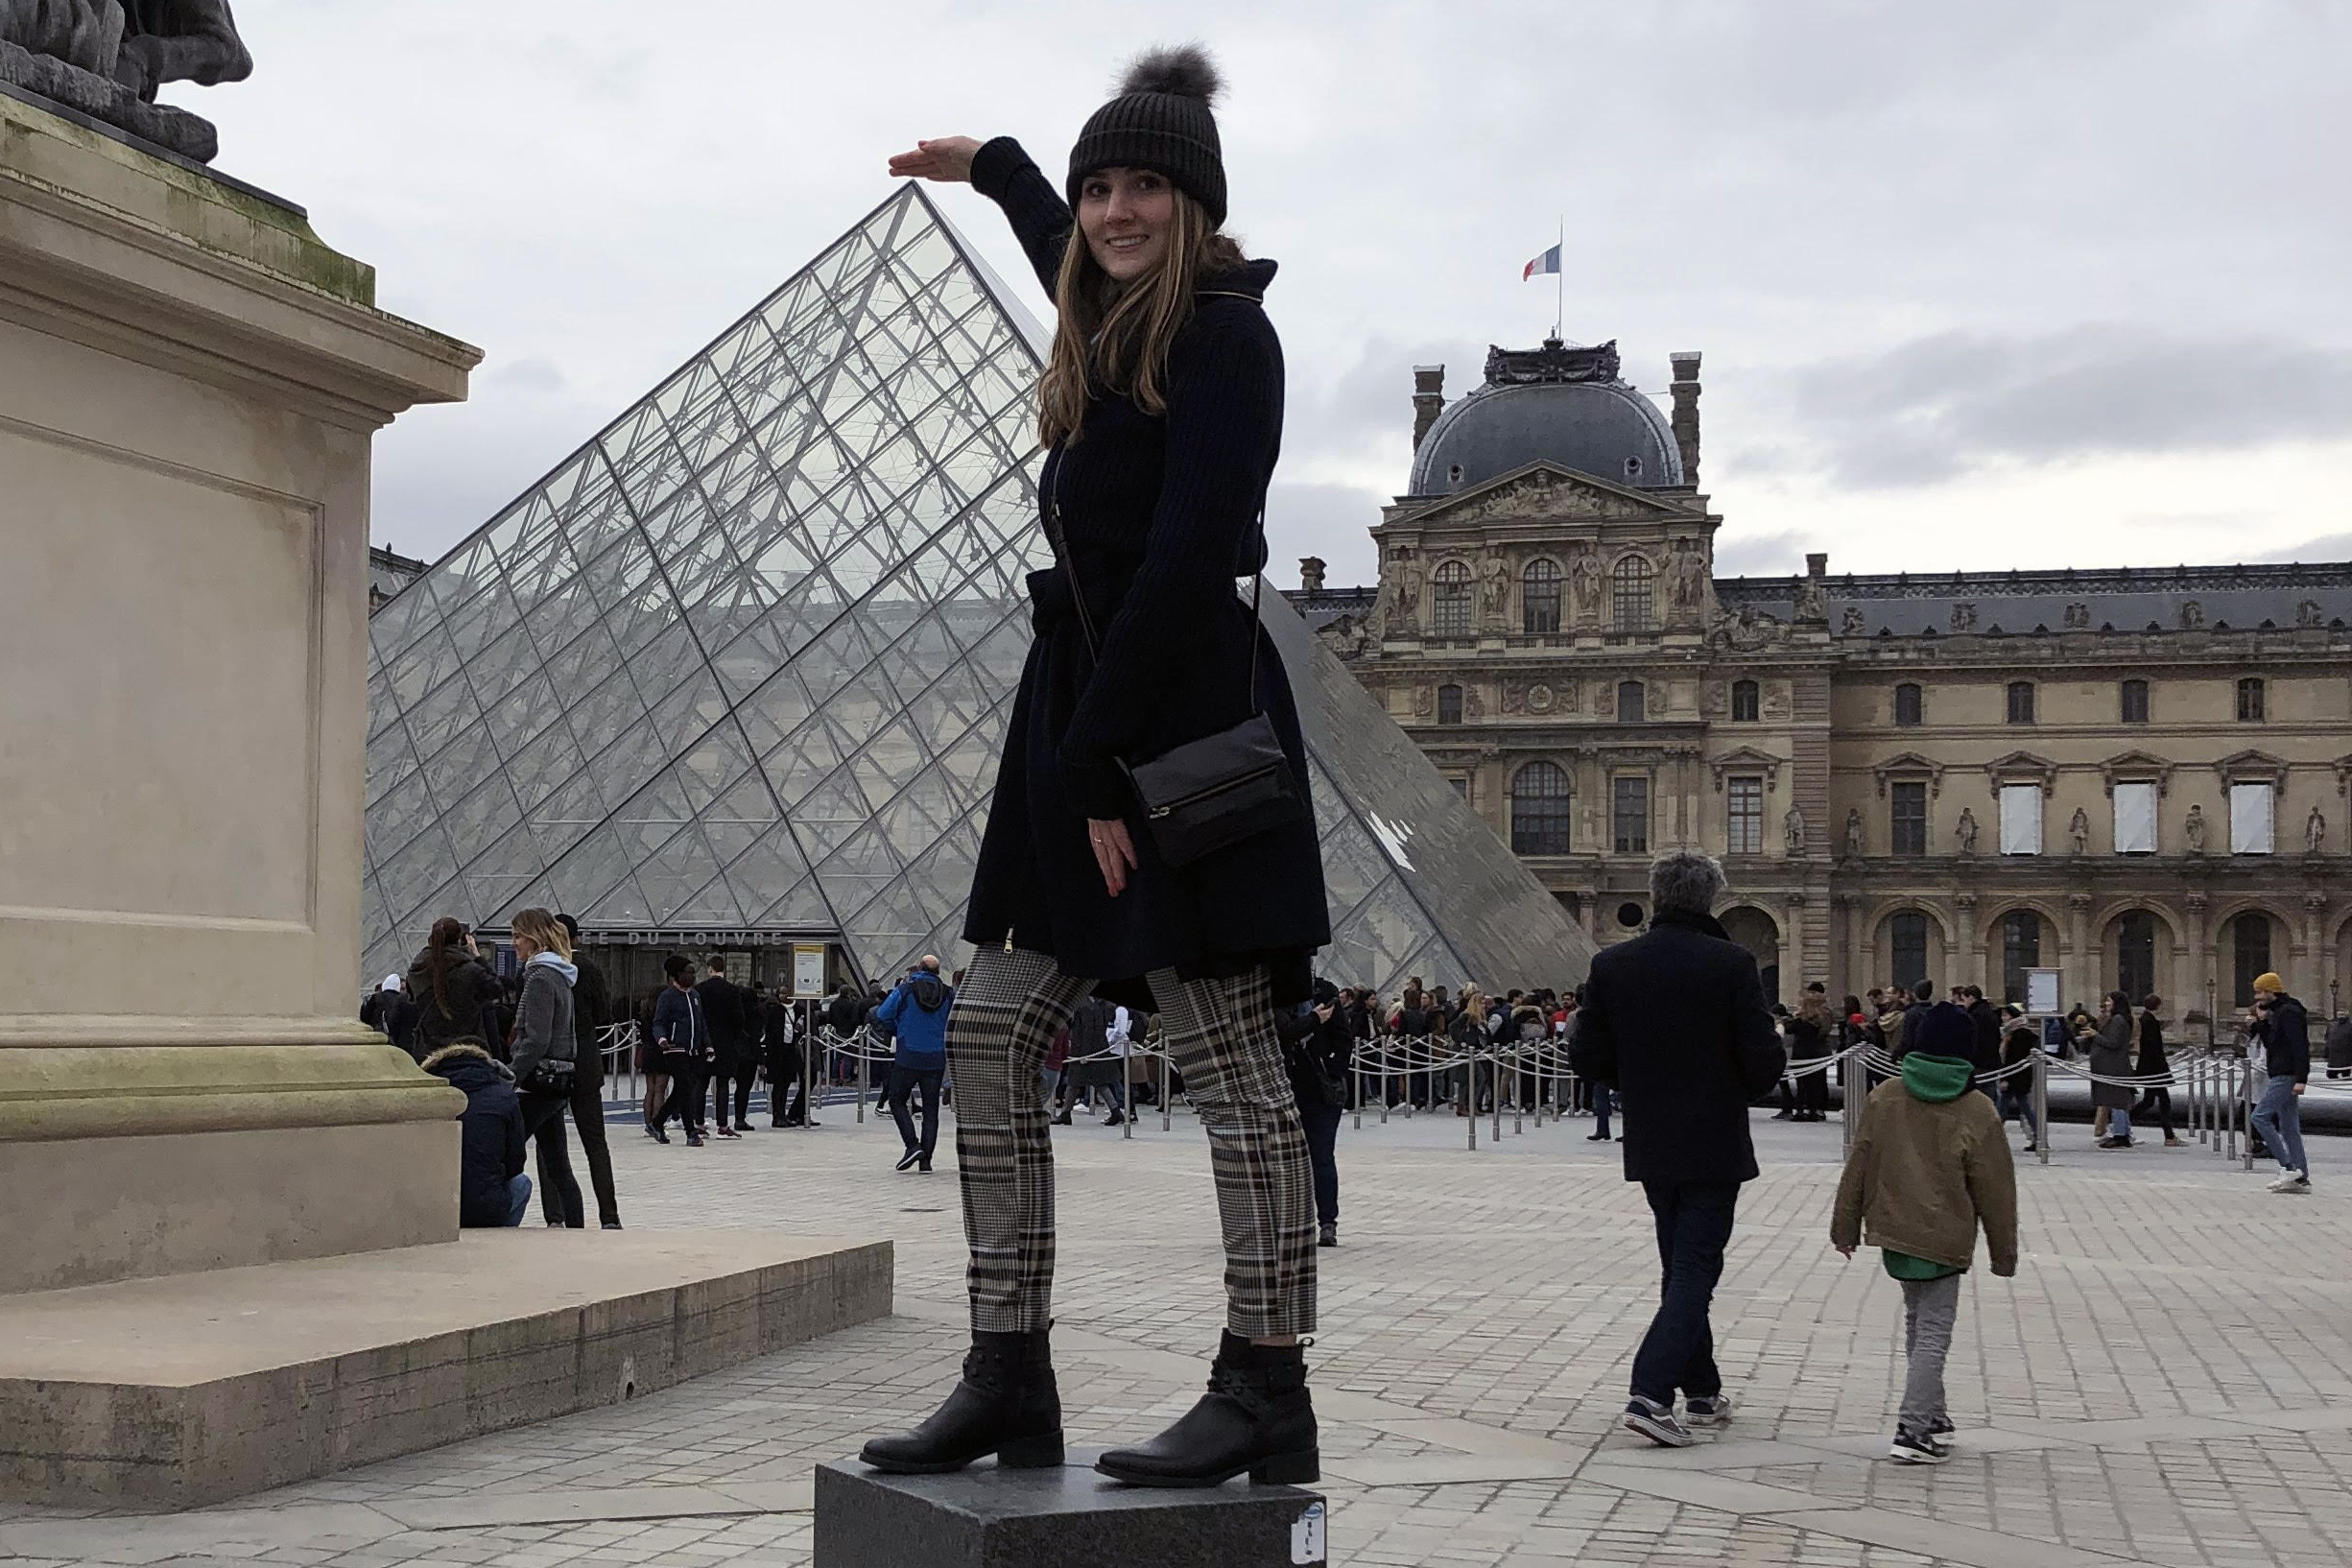 Isabella Scalise in front of the Louvre in Paris.